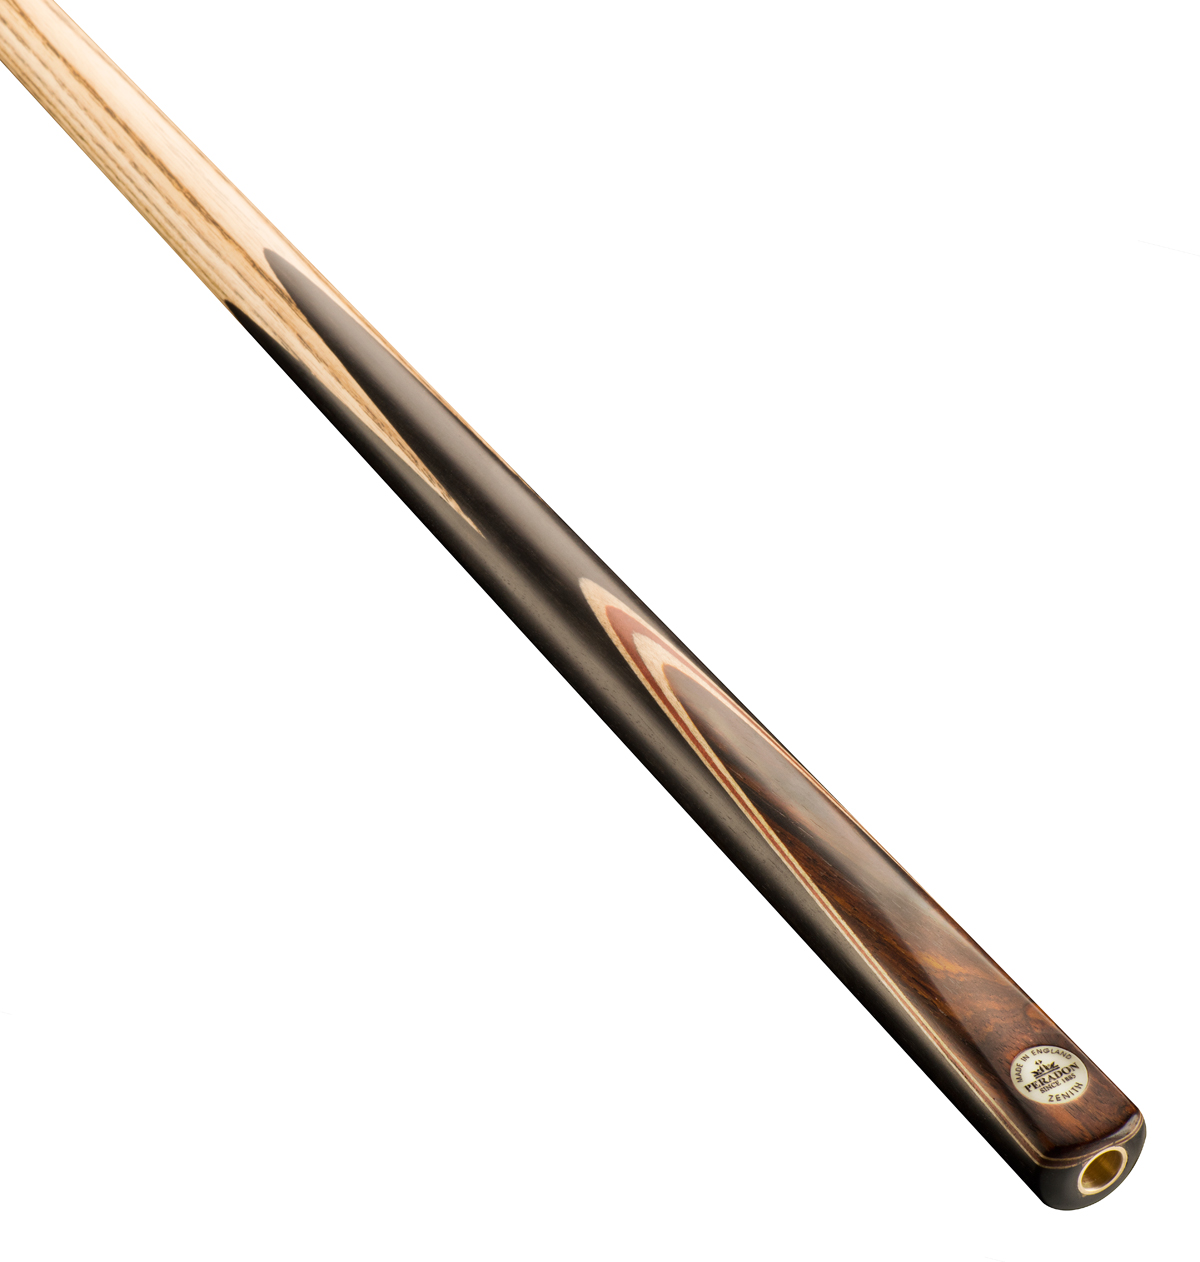 Zenith One Piece 8 Ball Pool Cue